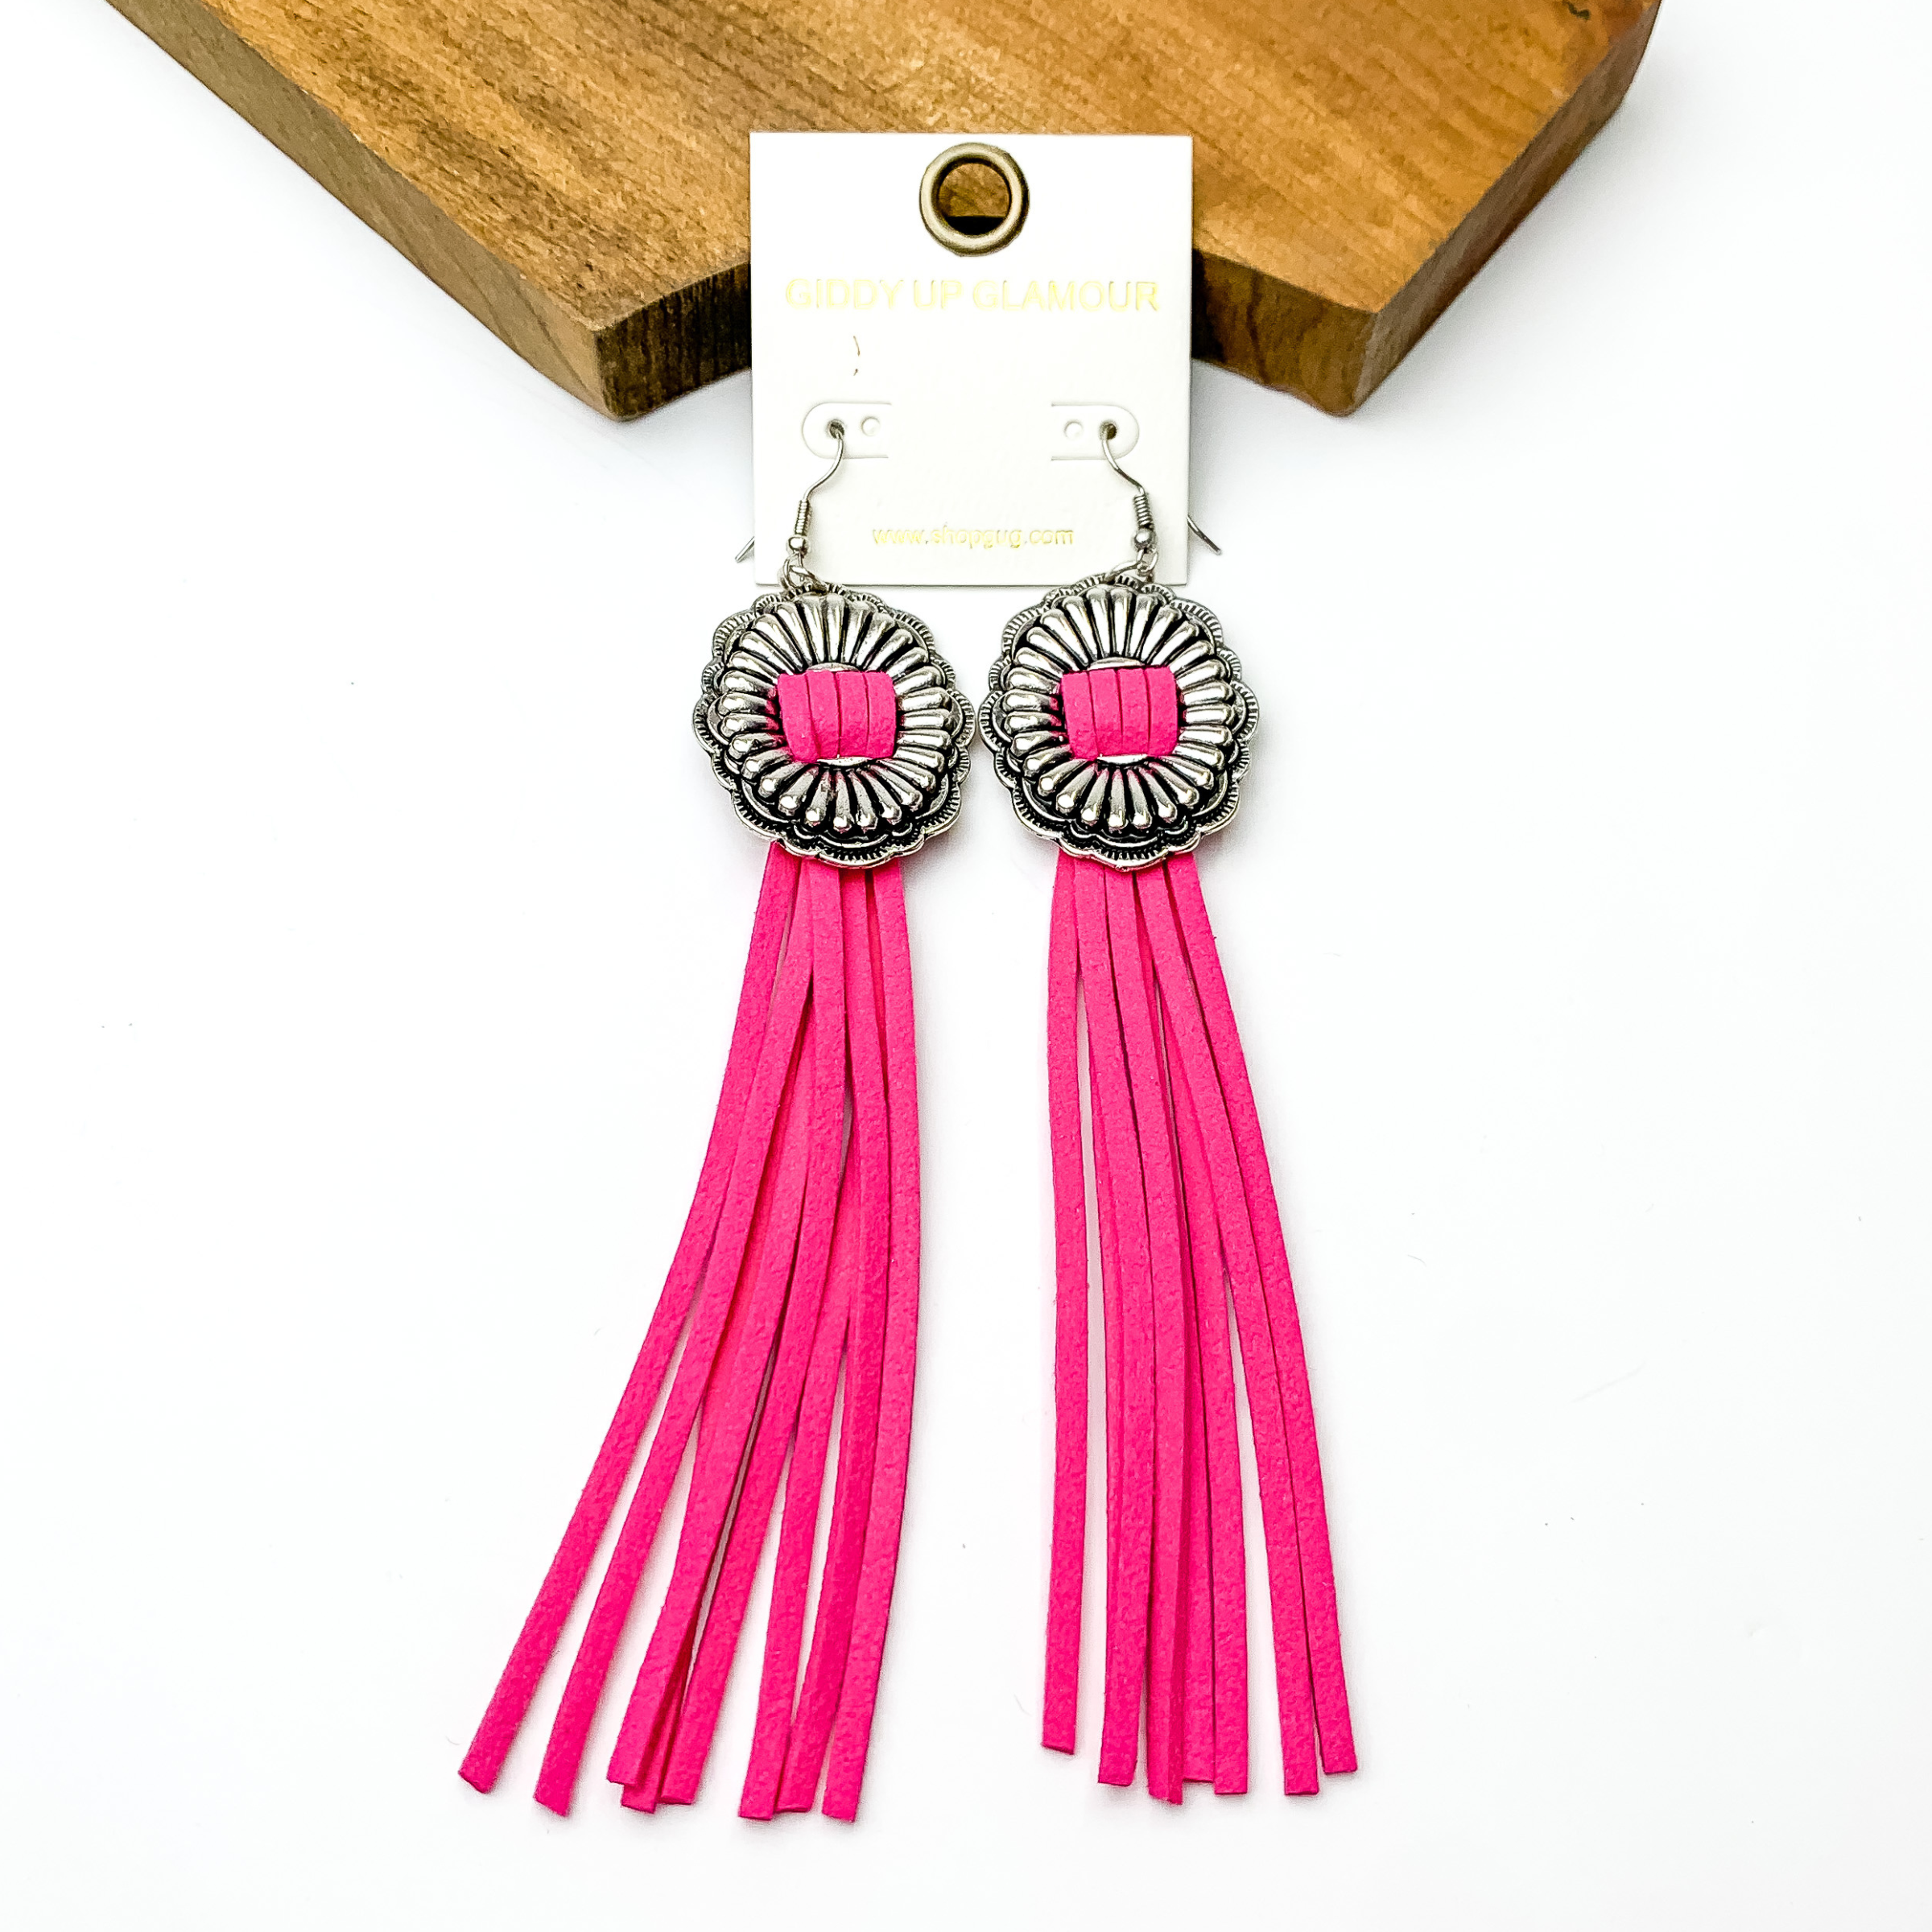 Silver concho dangle earrings with pink tassels. These earrings are pictured on a white background with a brown block at the top of the picture. 